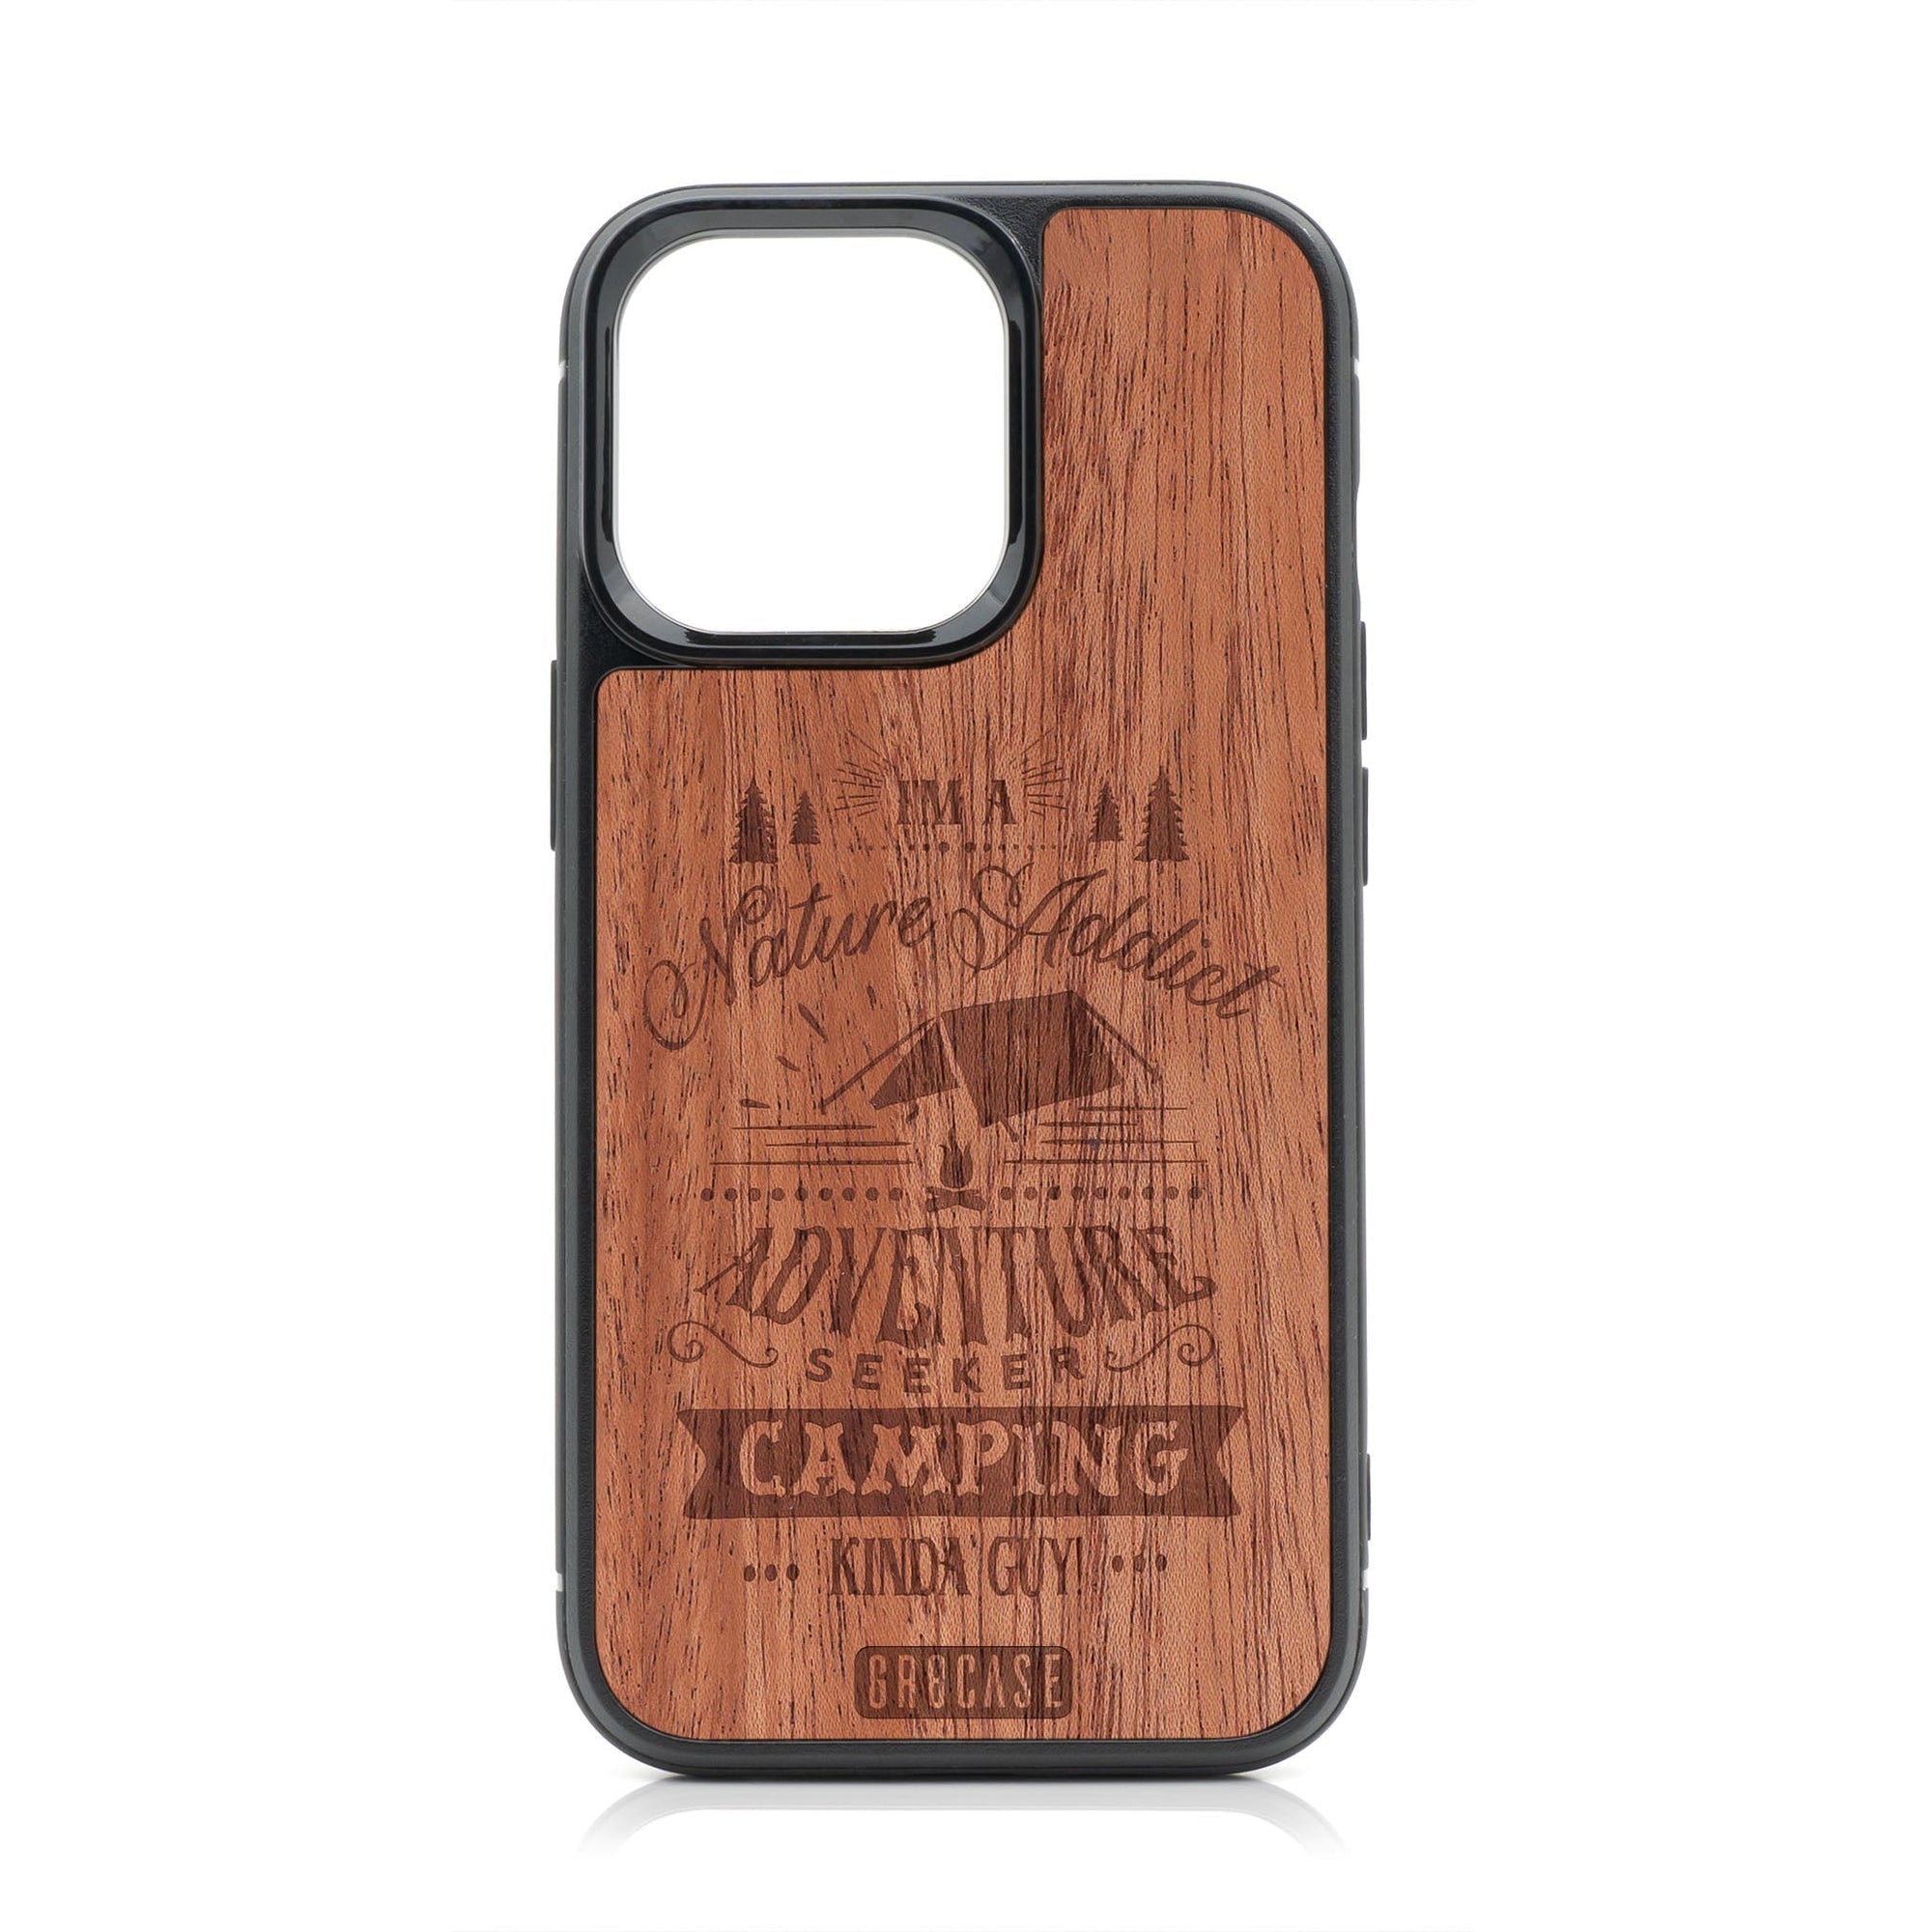 I'm A Nature Addict Adventure Seeker Camping Kinda Guy Design Wood Case For iPhone 15 Pro